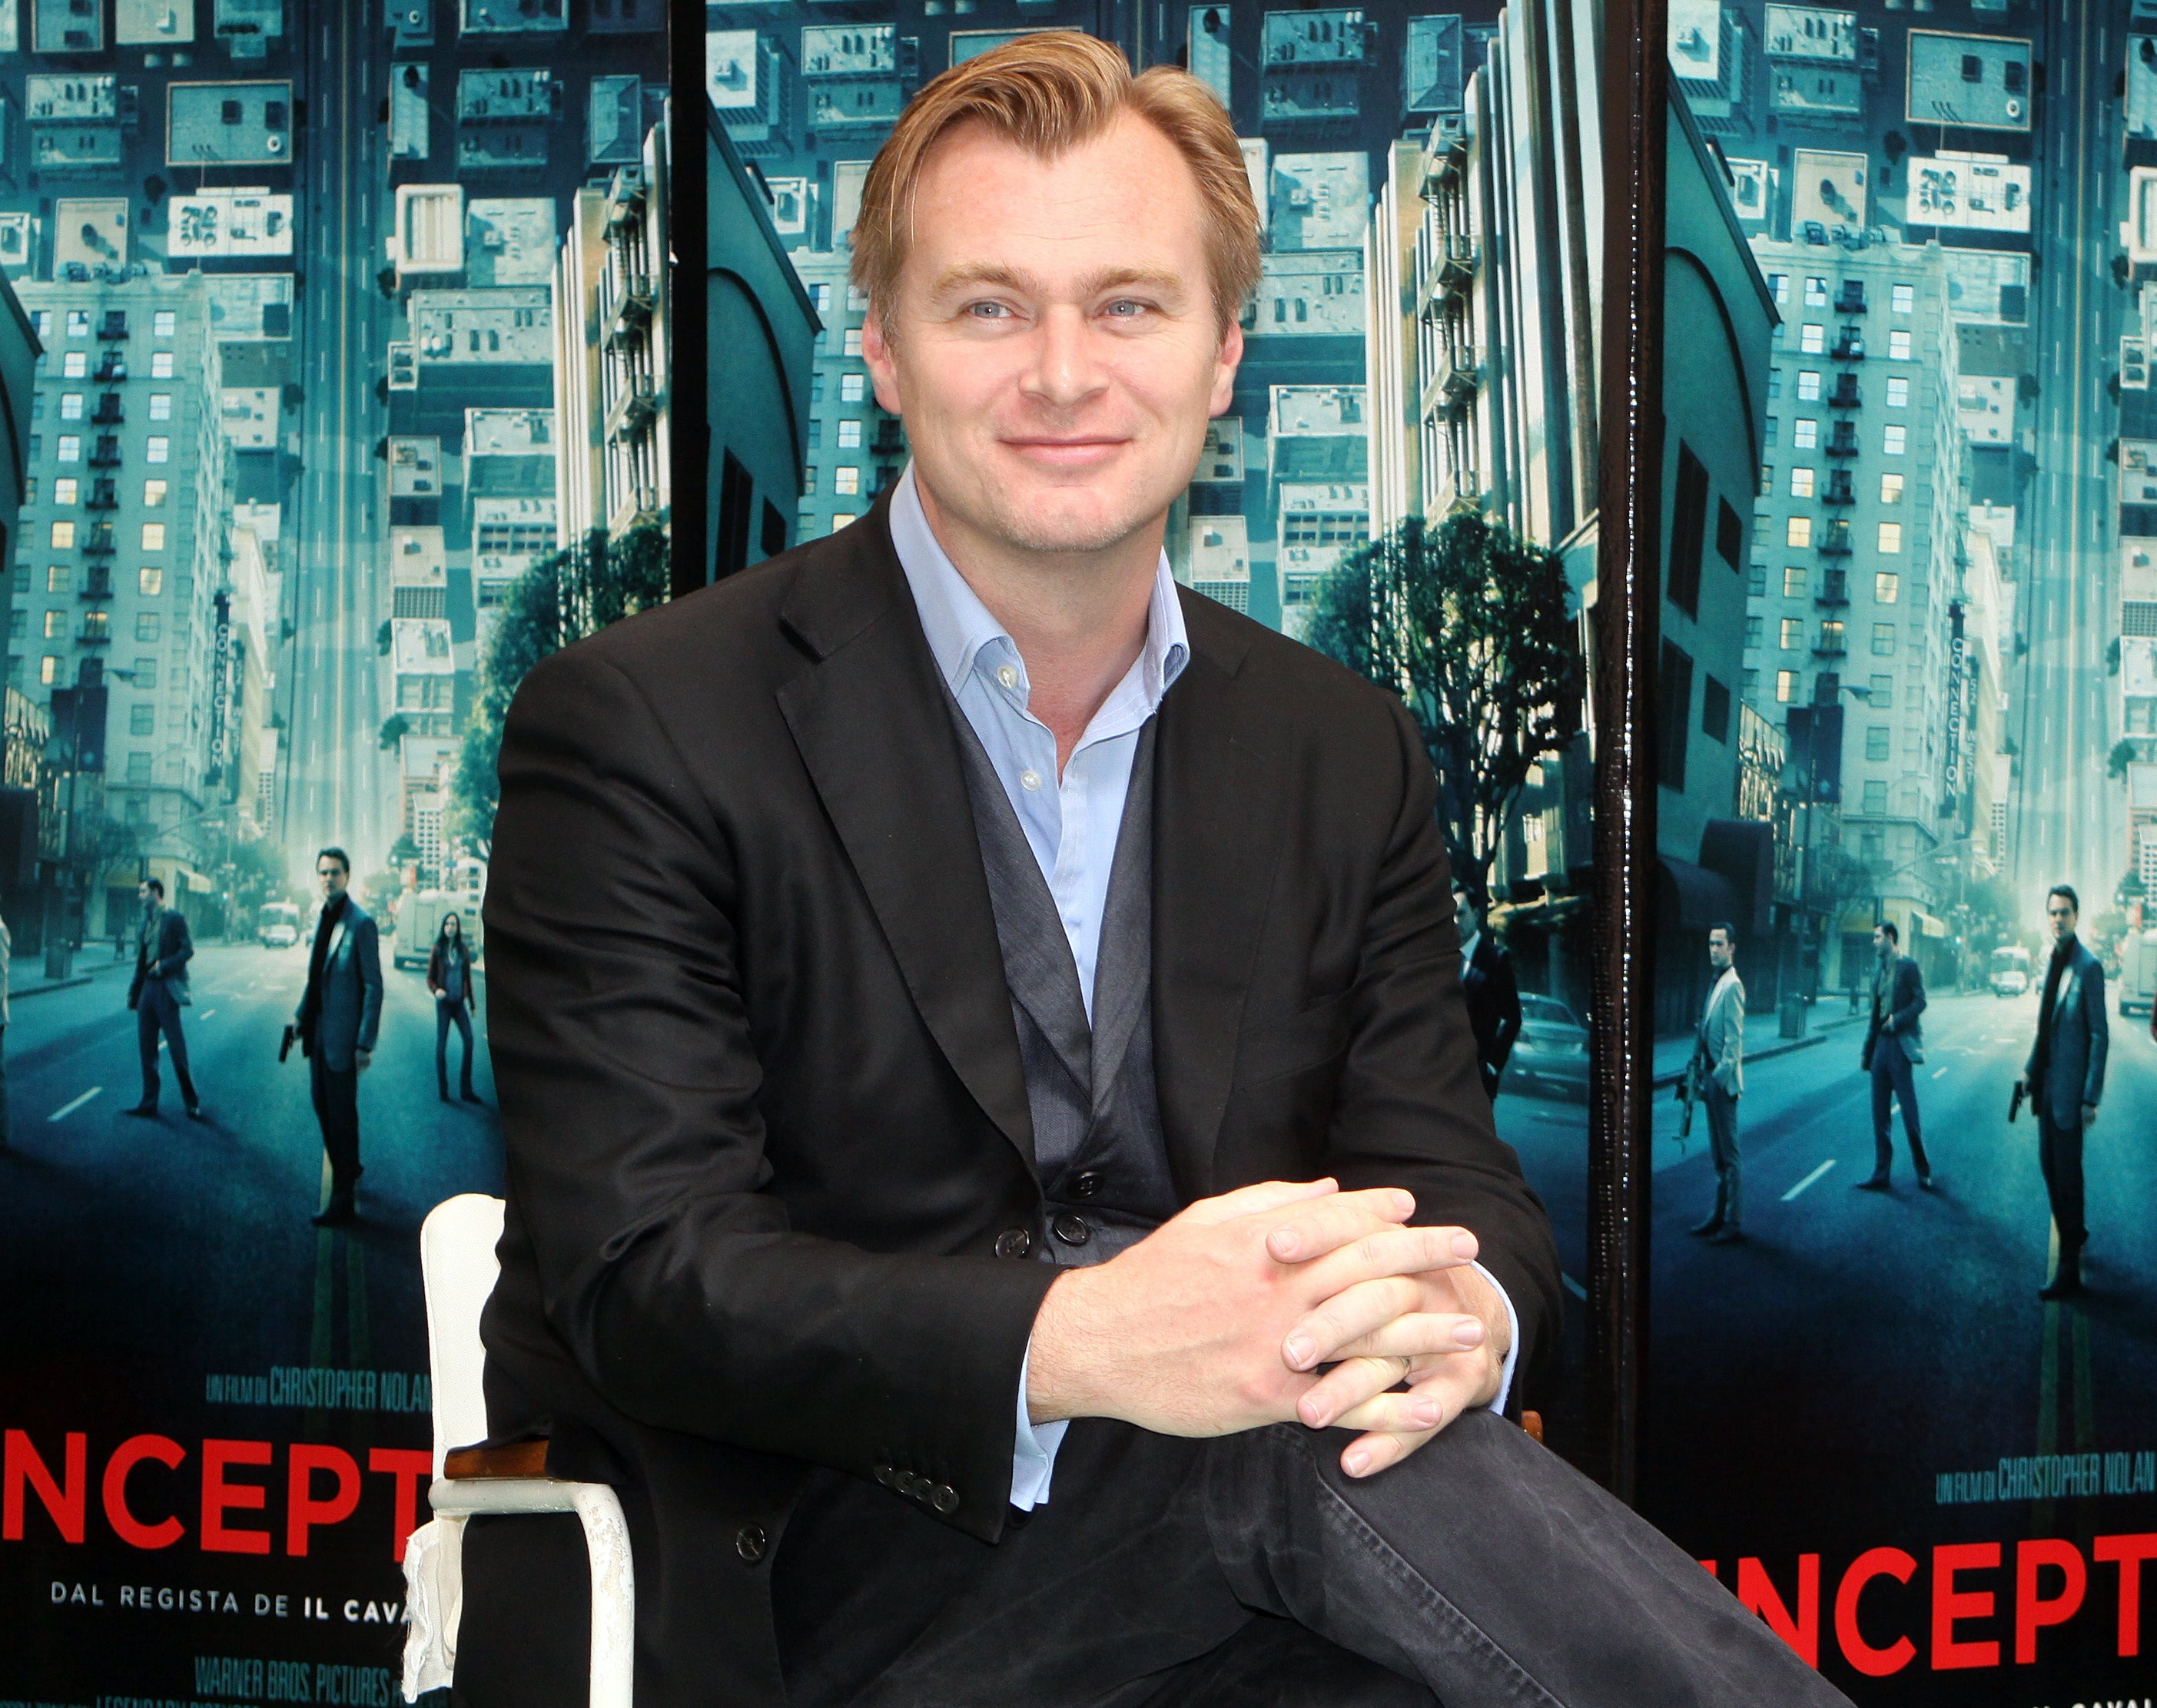 A close-up of Christopher sitting in front of the Inception movie poster